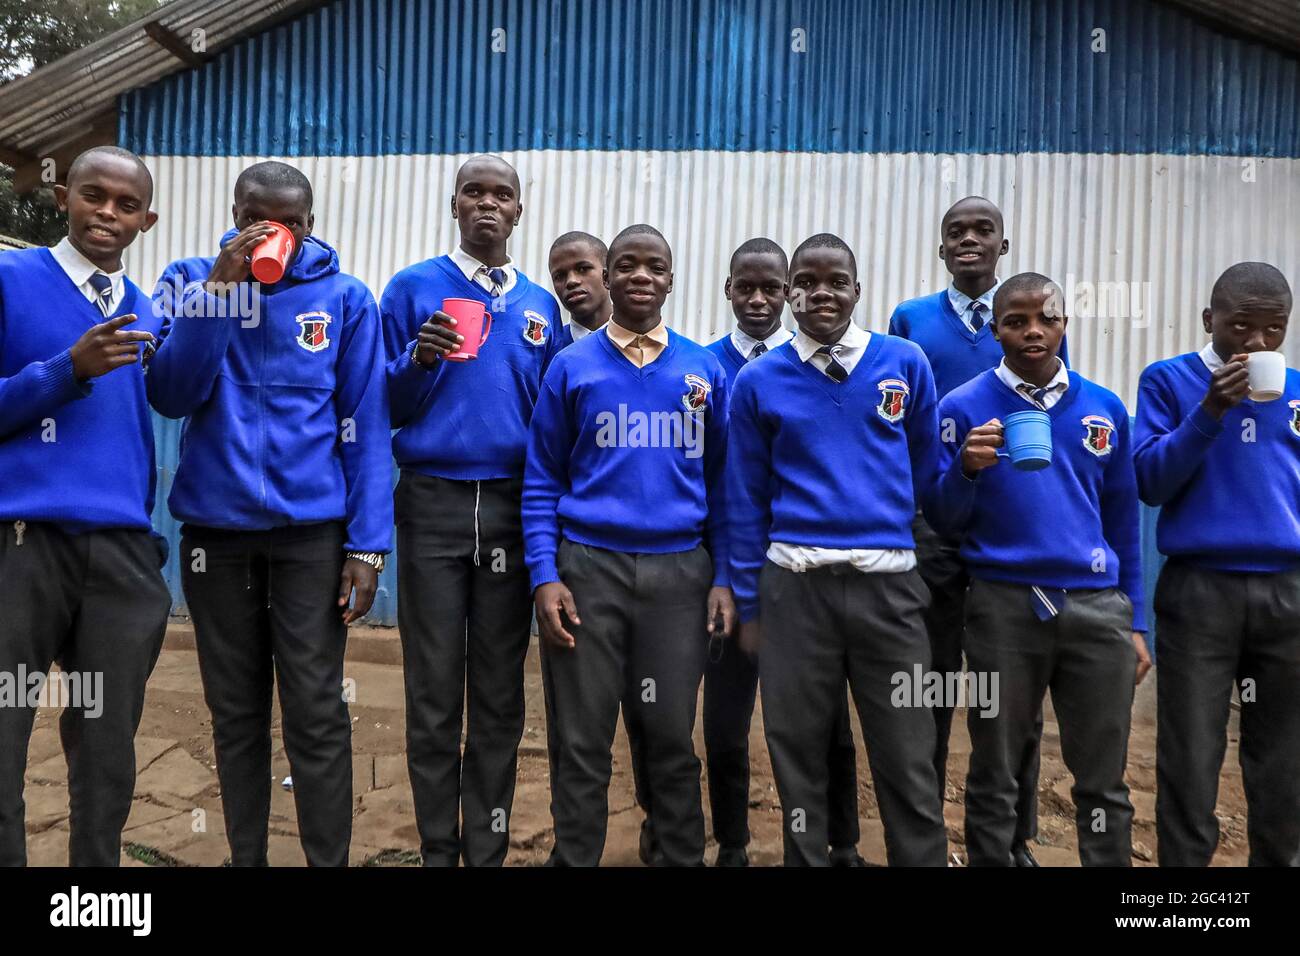 The 18-year-old Saviour Omondi, a local artist (C) takes a photo with his school mates outside his school compound in Raila Educational Centre in Nairobi.An 18-year-old artist born and raised in Kibera, from a family of five, he began his love for art back in 2009 by copying and learning most skills from his dad who was doing art but not to a professional level. Omondi’s main focus was to portray his home through his artwork and dreamt of making the best out of his art in the future after his studies. Stock Photo